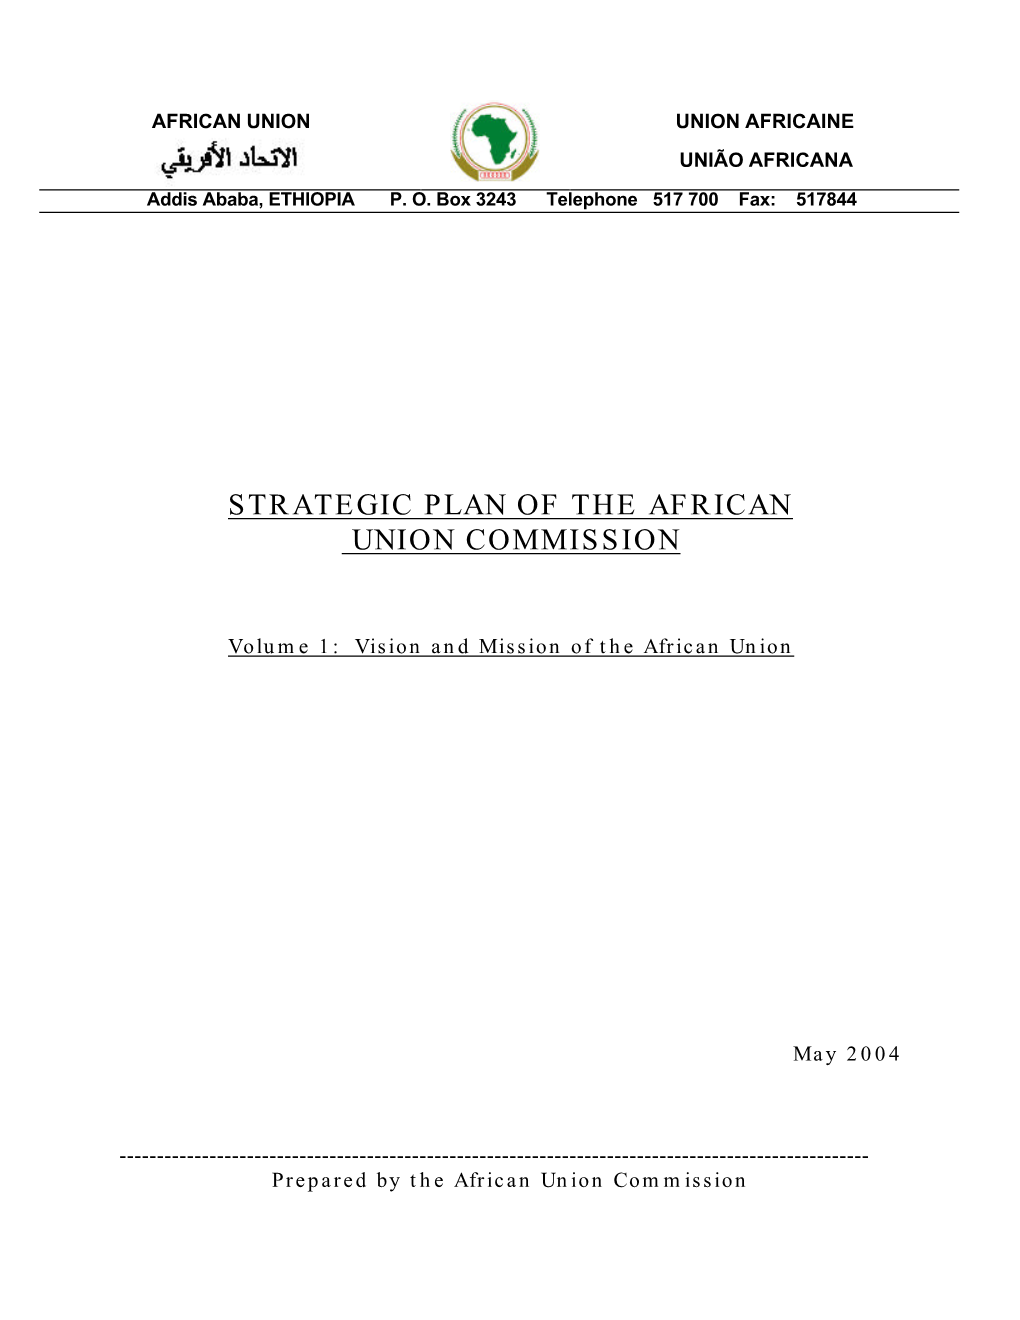 Strategic Plan of the African Union Commission